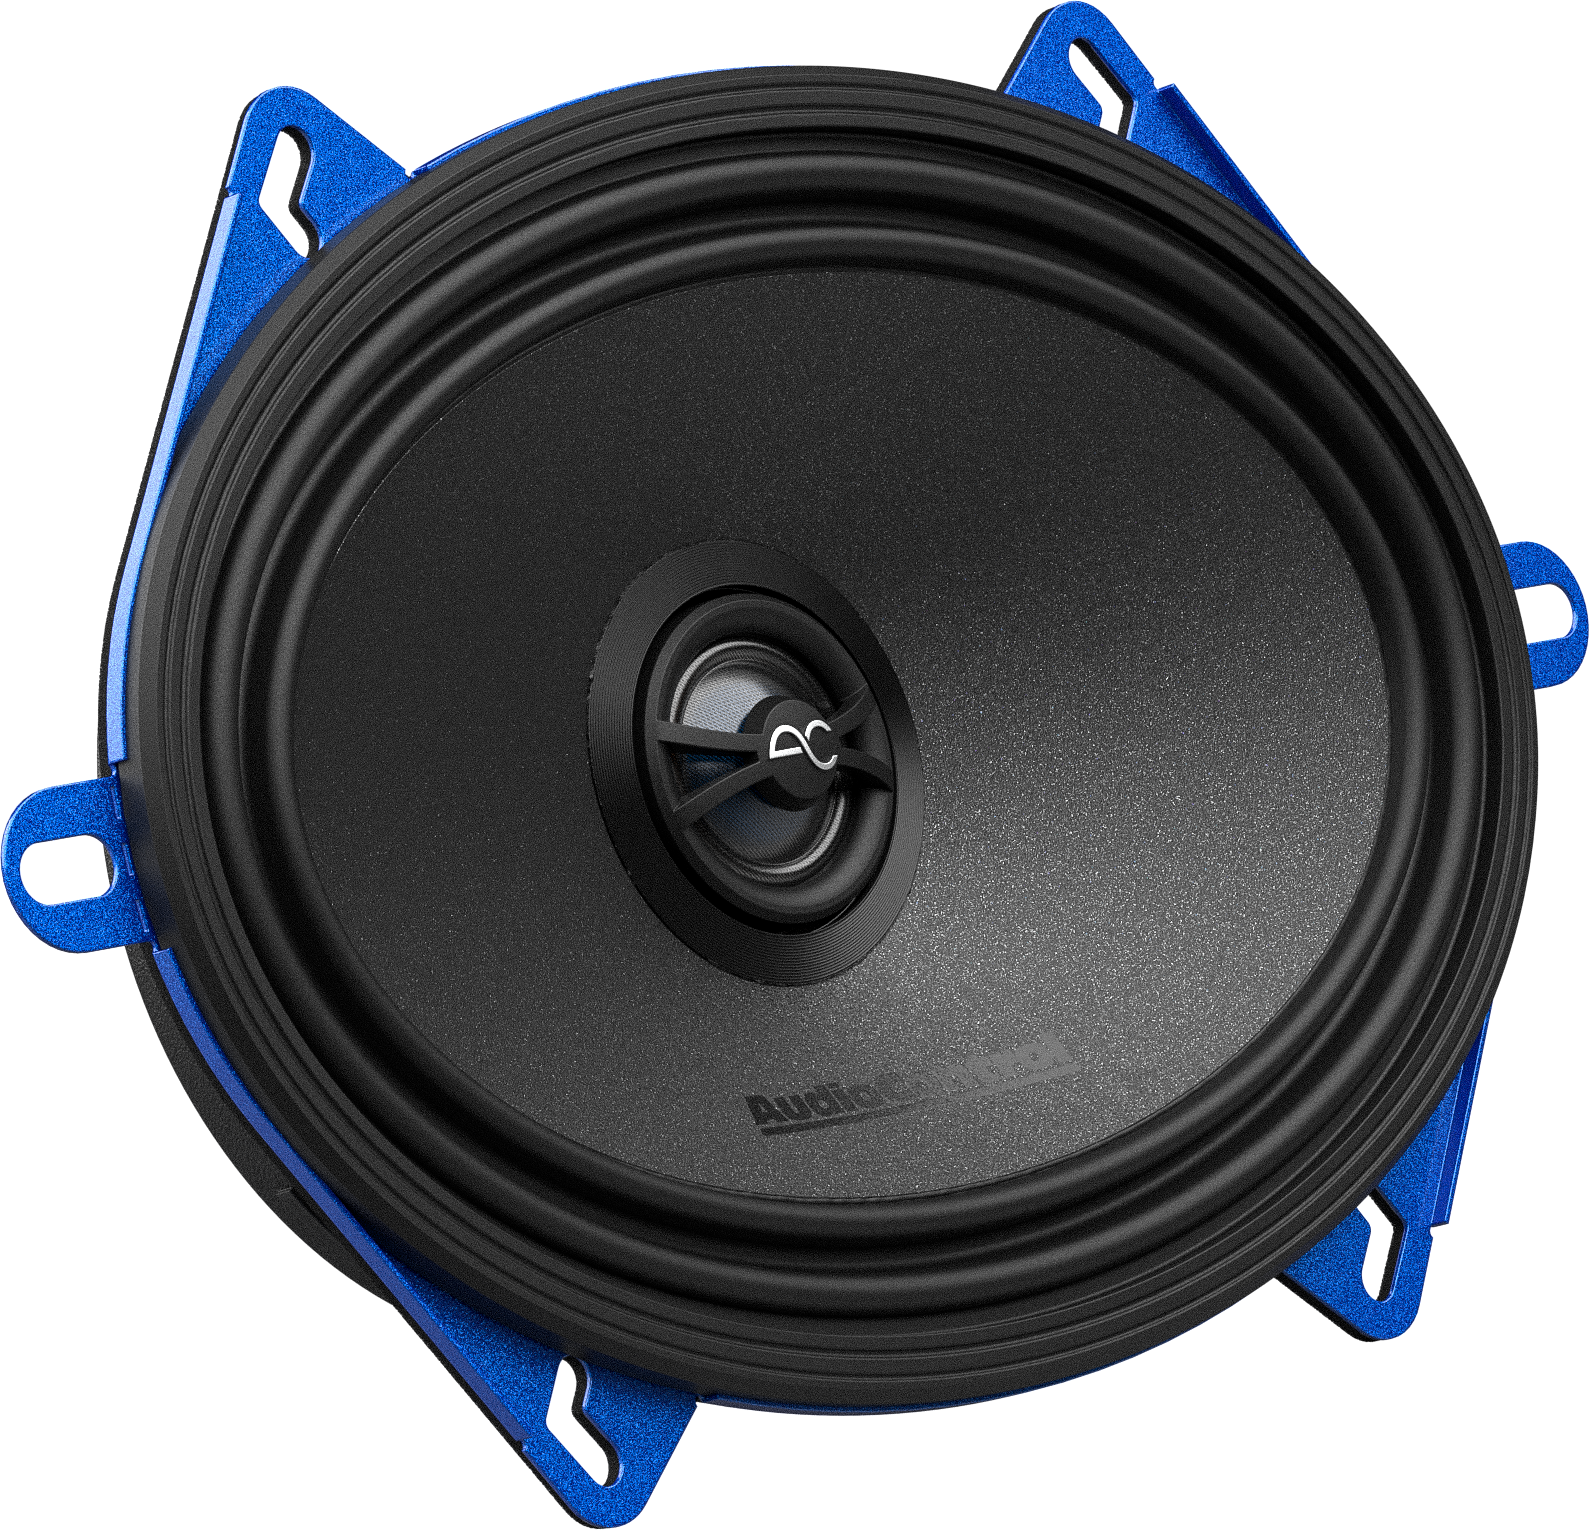 Stinger Off-Road Audio Control PNW Series 5x7" 75 Watt (RMS) High-Fidelity Coaxial Speakers